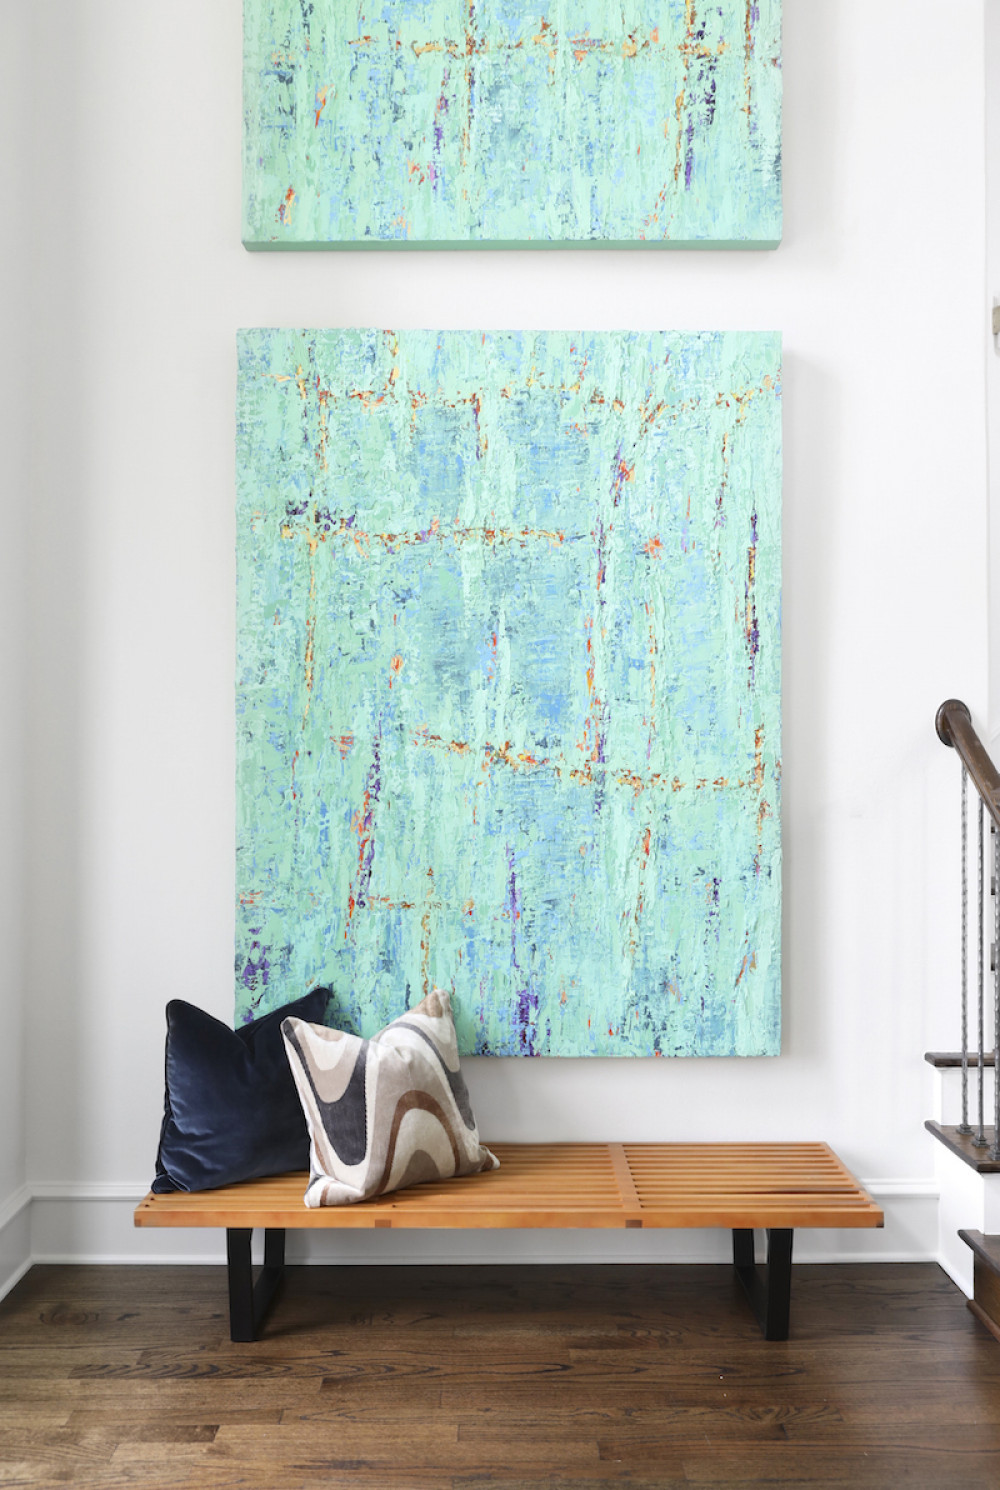 large-teal-hanging-wall-art-mural-wooden-bench